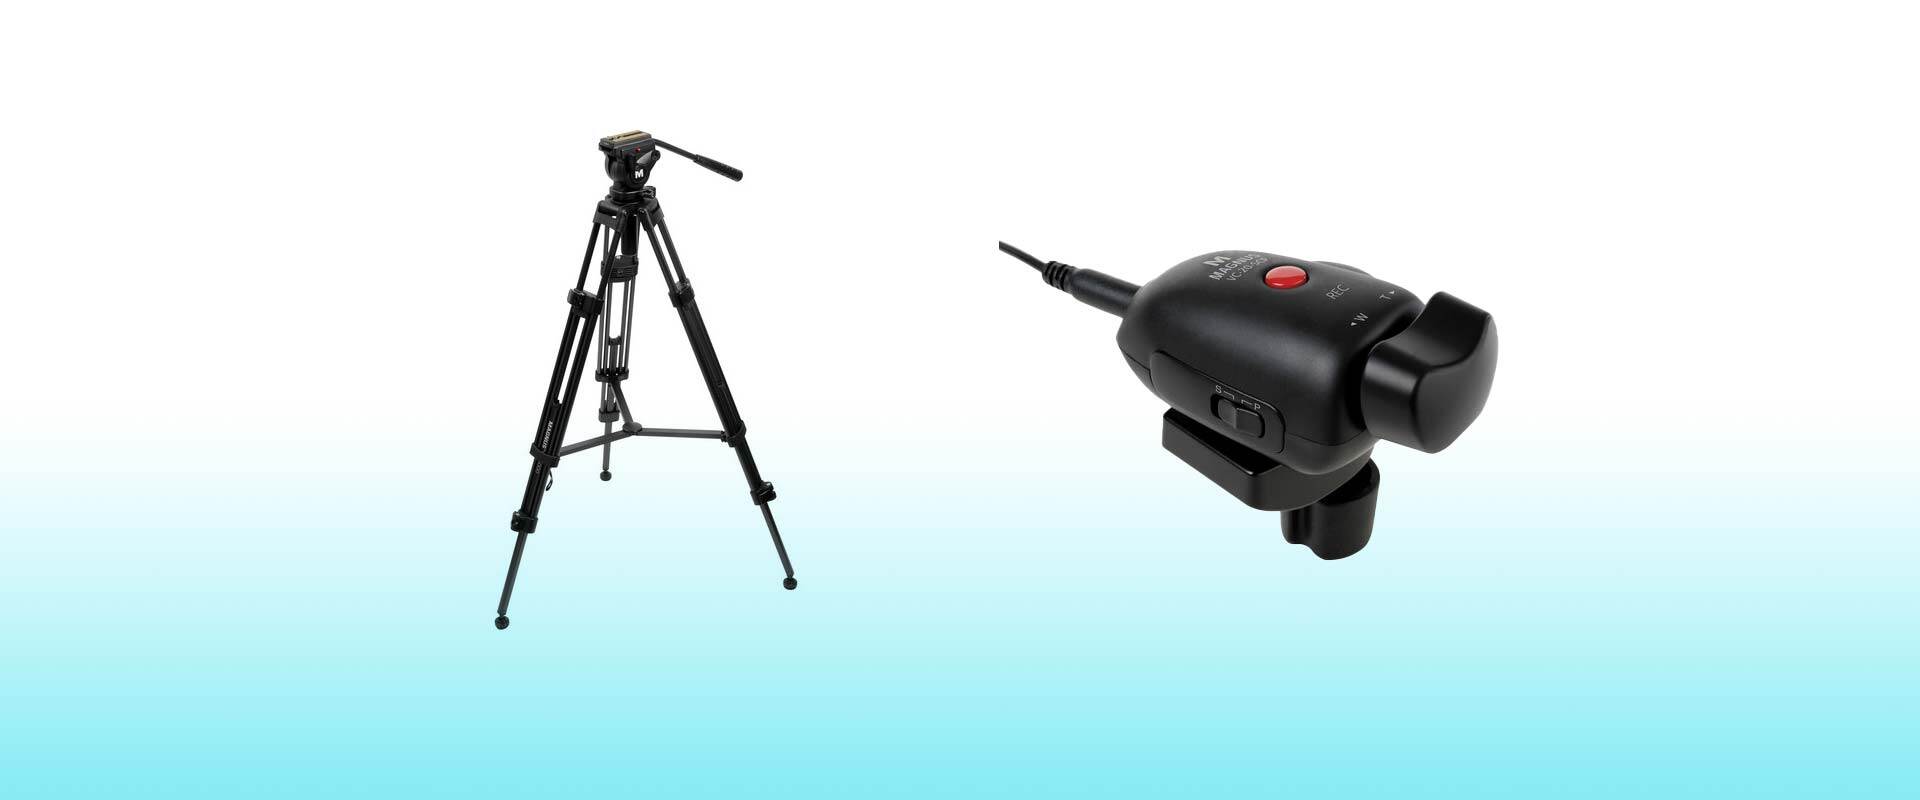 Magnus VT-4000 video tripod with zoom controller